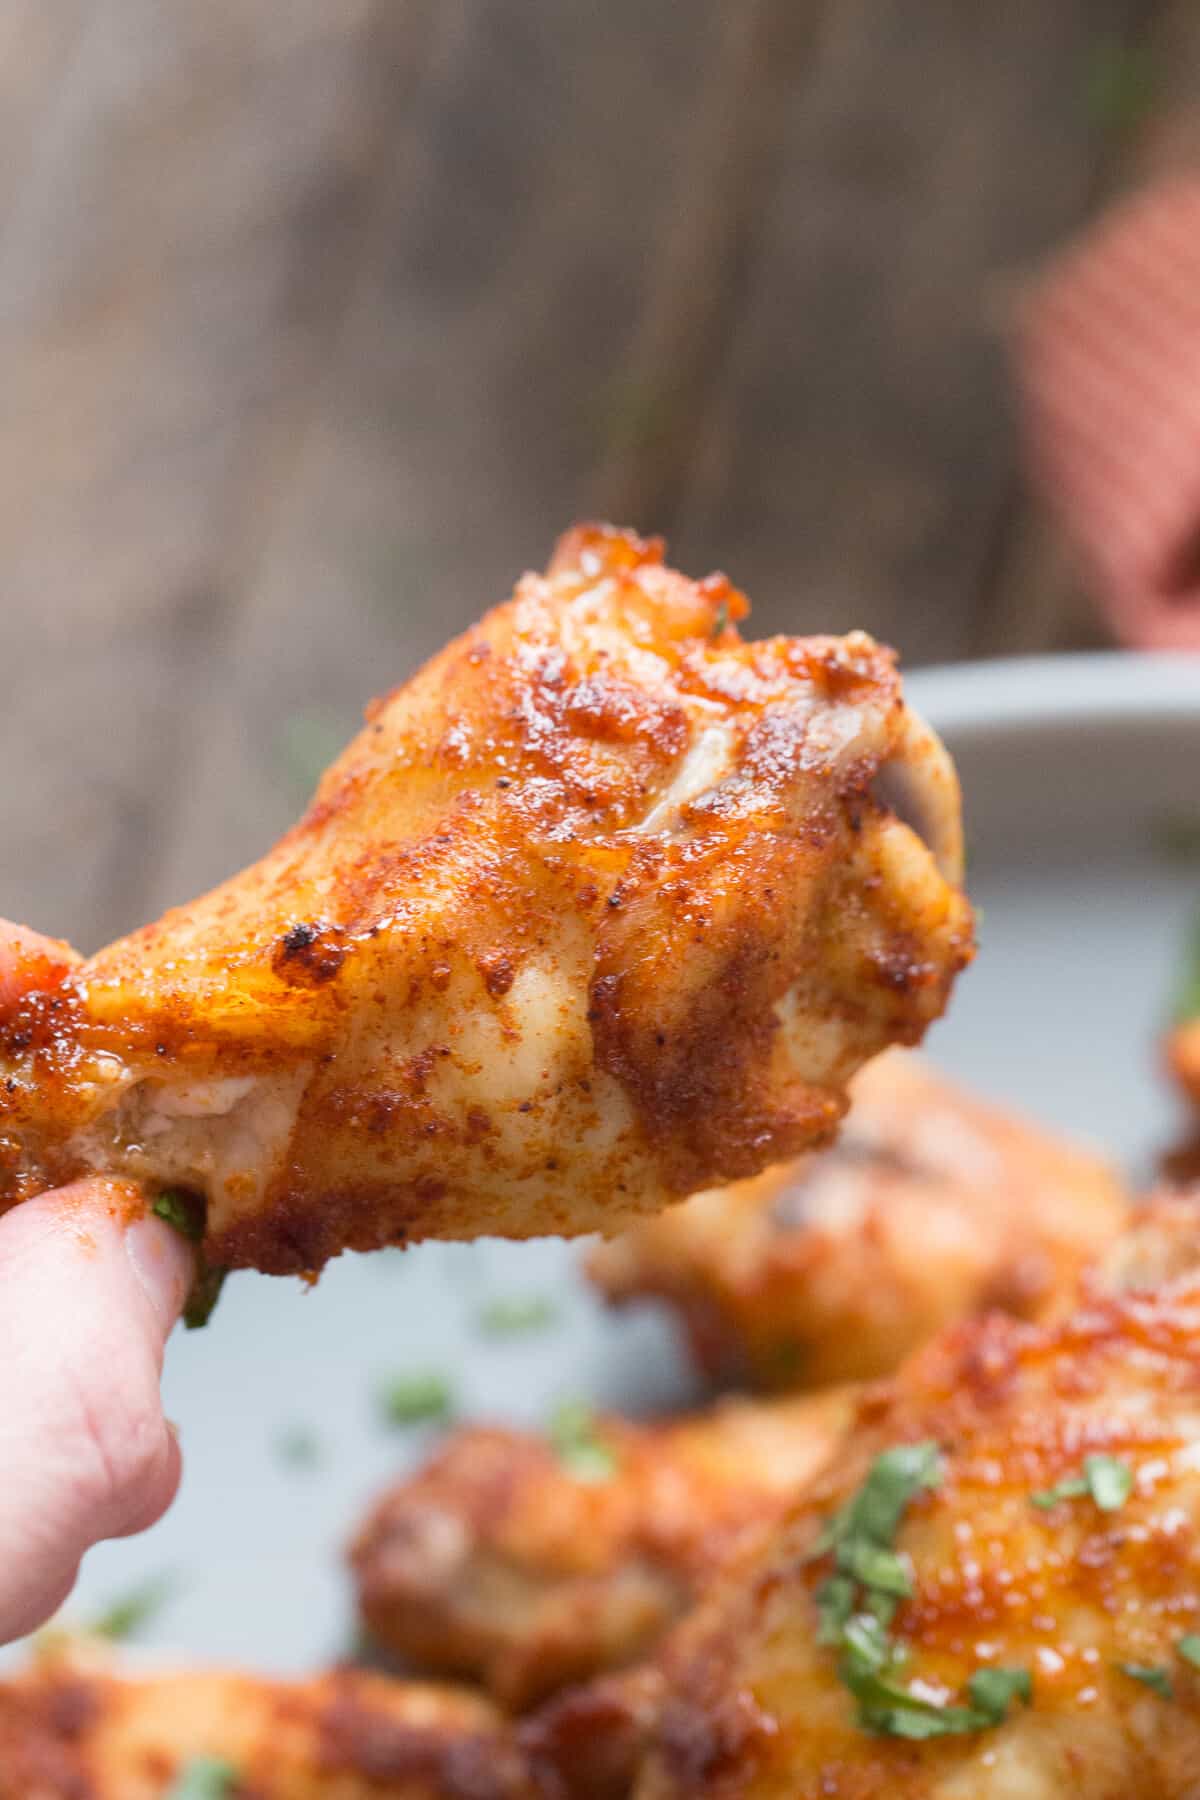 Forget the sauce! Dry rub wings have so much flavor and are just as delicious as their saucy counterparts!